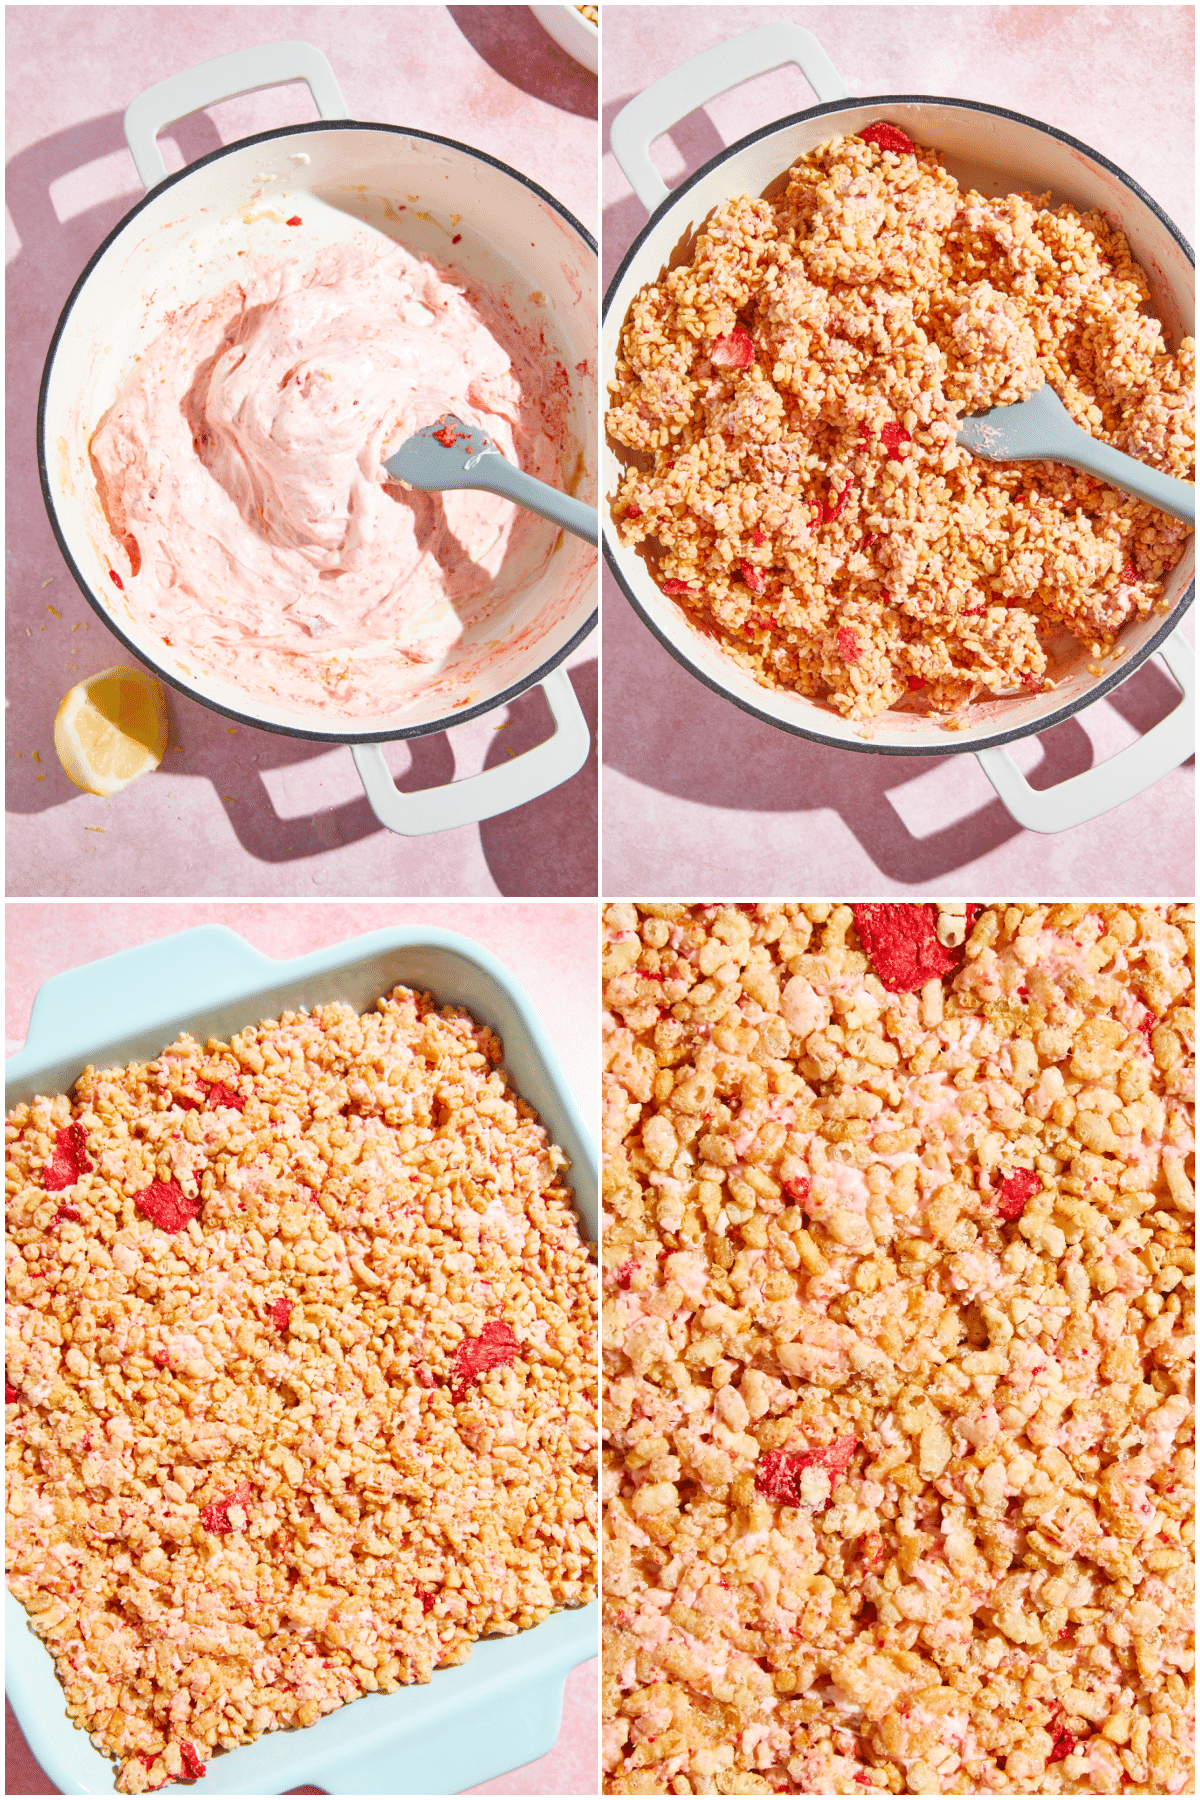 A four image collage showing how to make strawberry lemon rice crispies, part two: stir the strawberries into the melted marshmallows, add the cereal and stir, press into the pan.